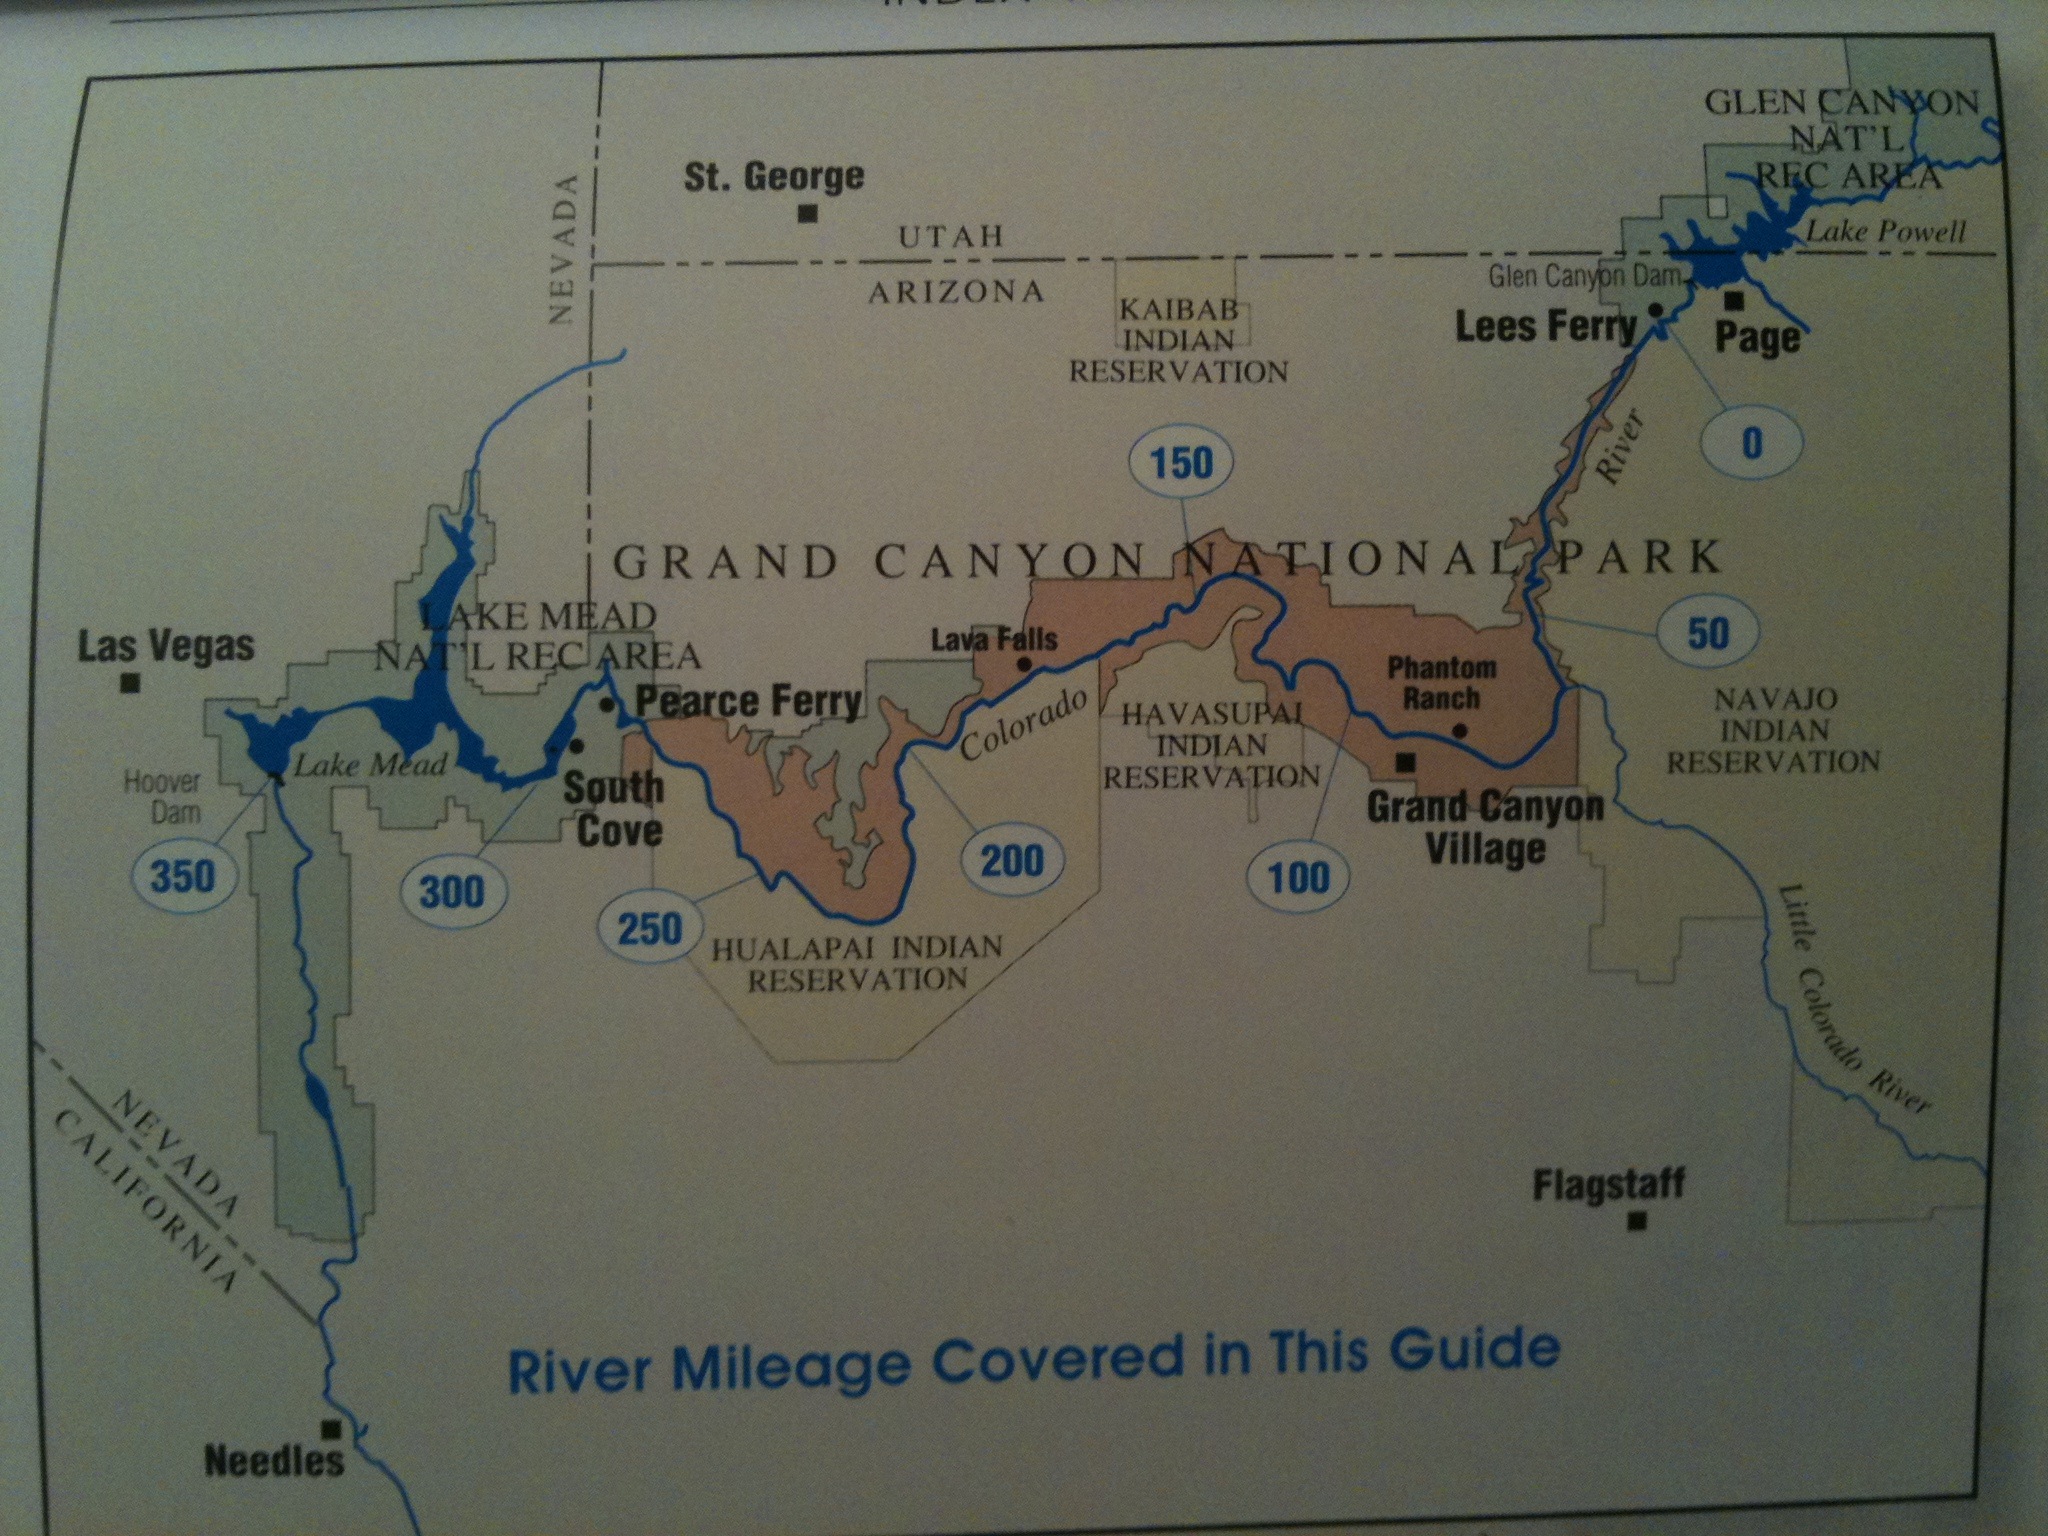 answers in genesis grand canyon tour